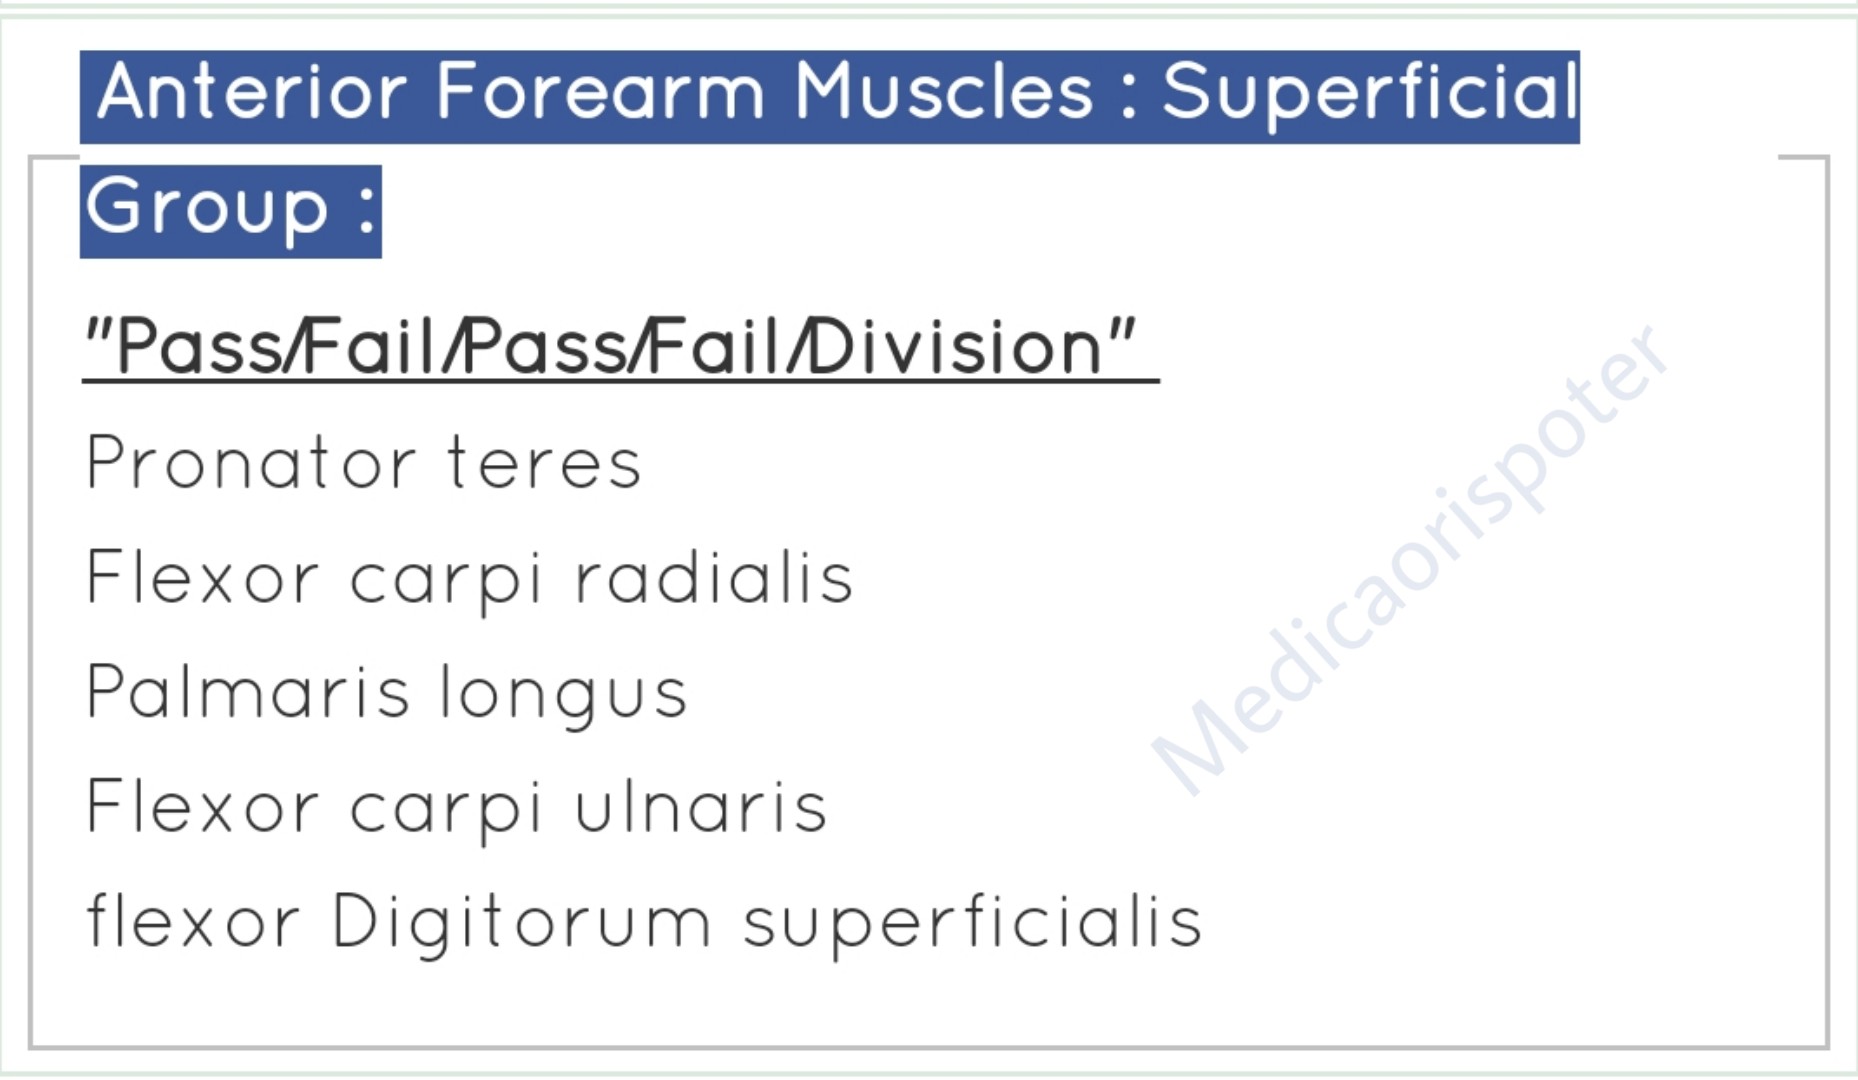 Anterior Forearm Muscles Superficial Group